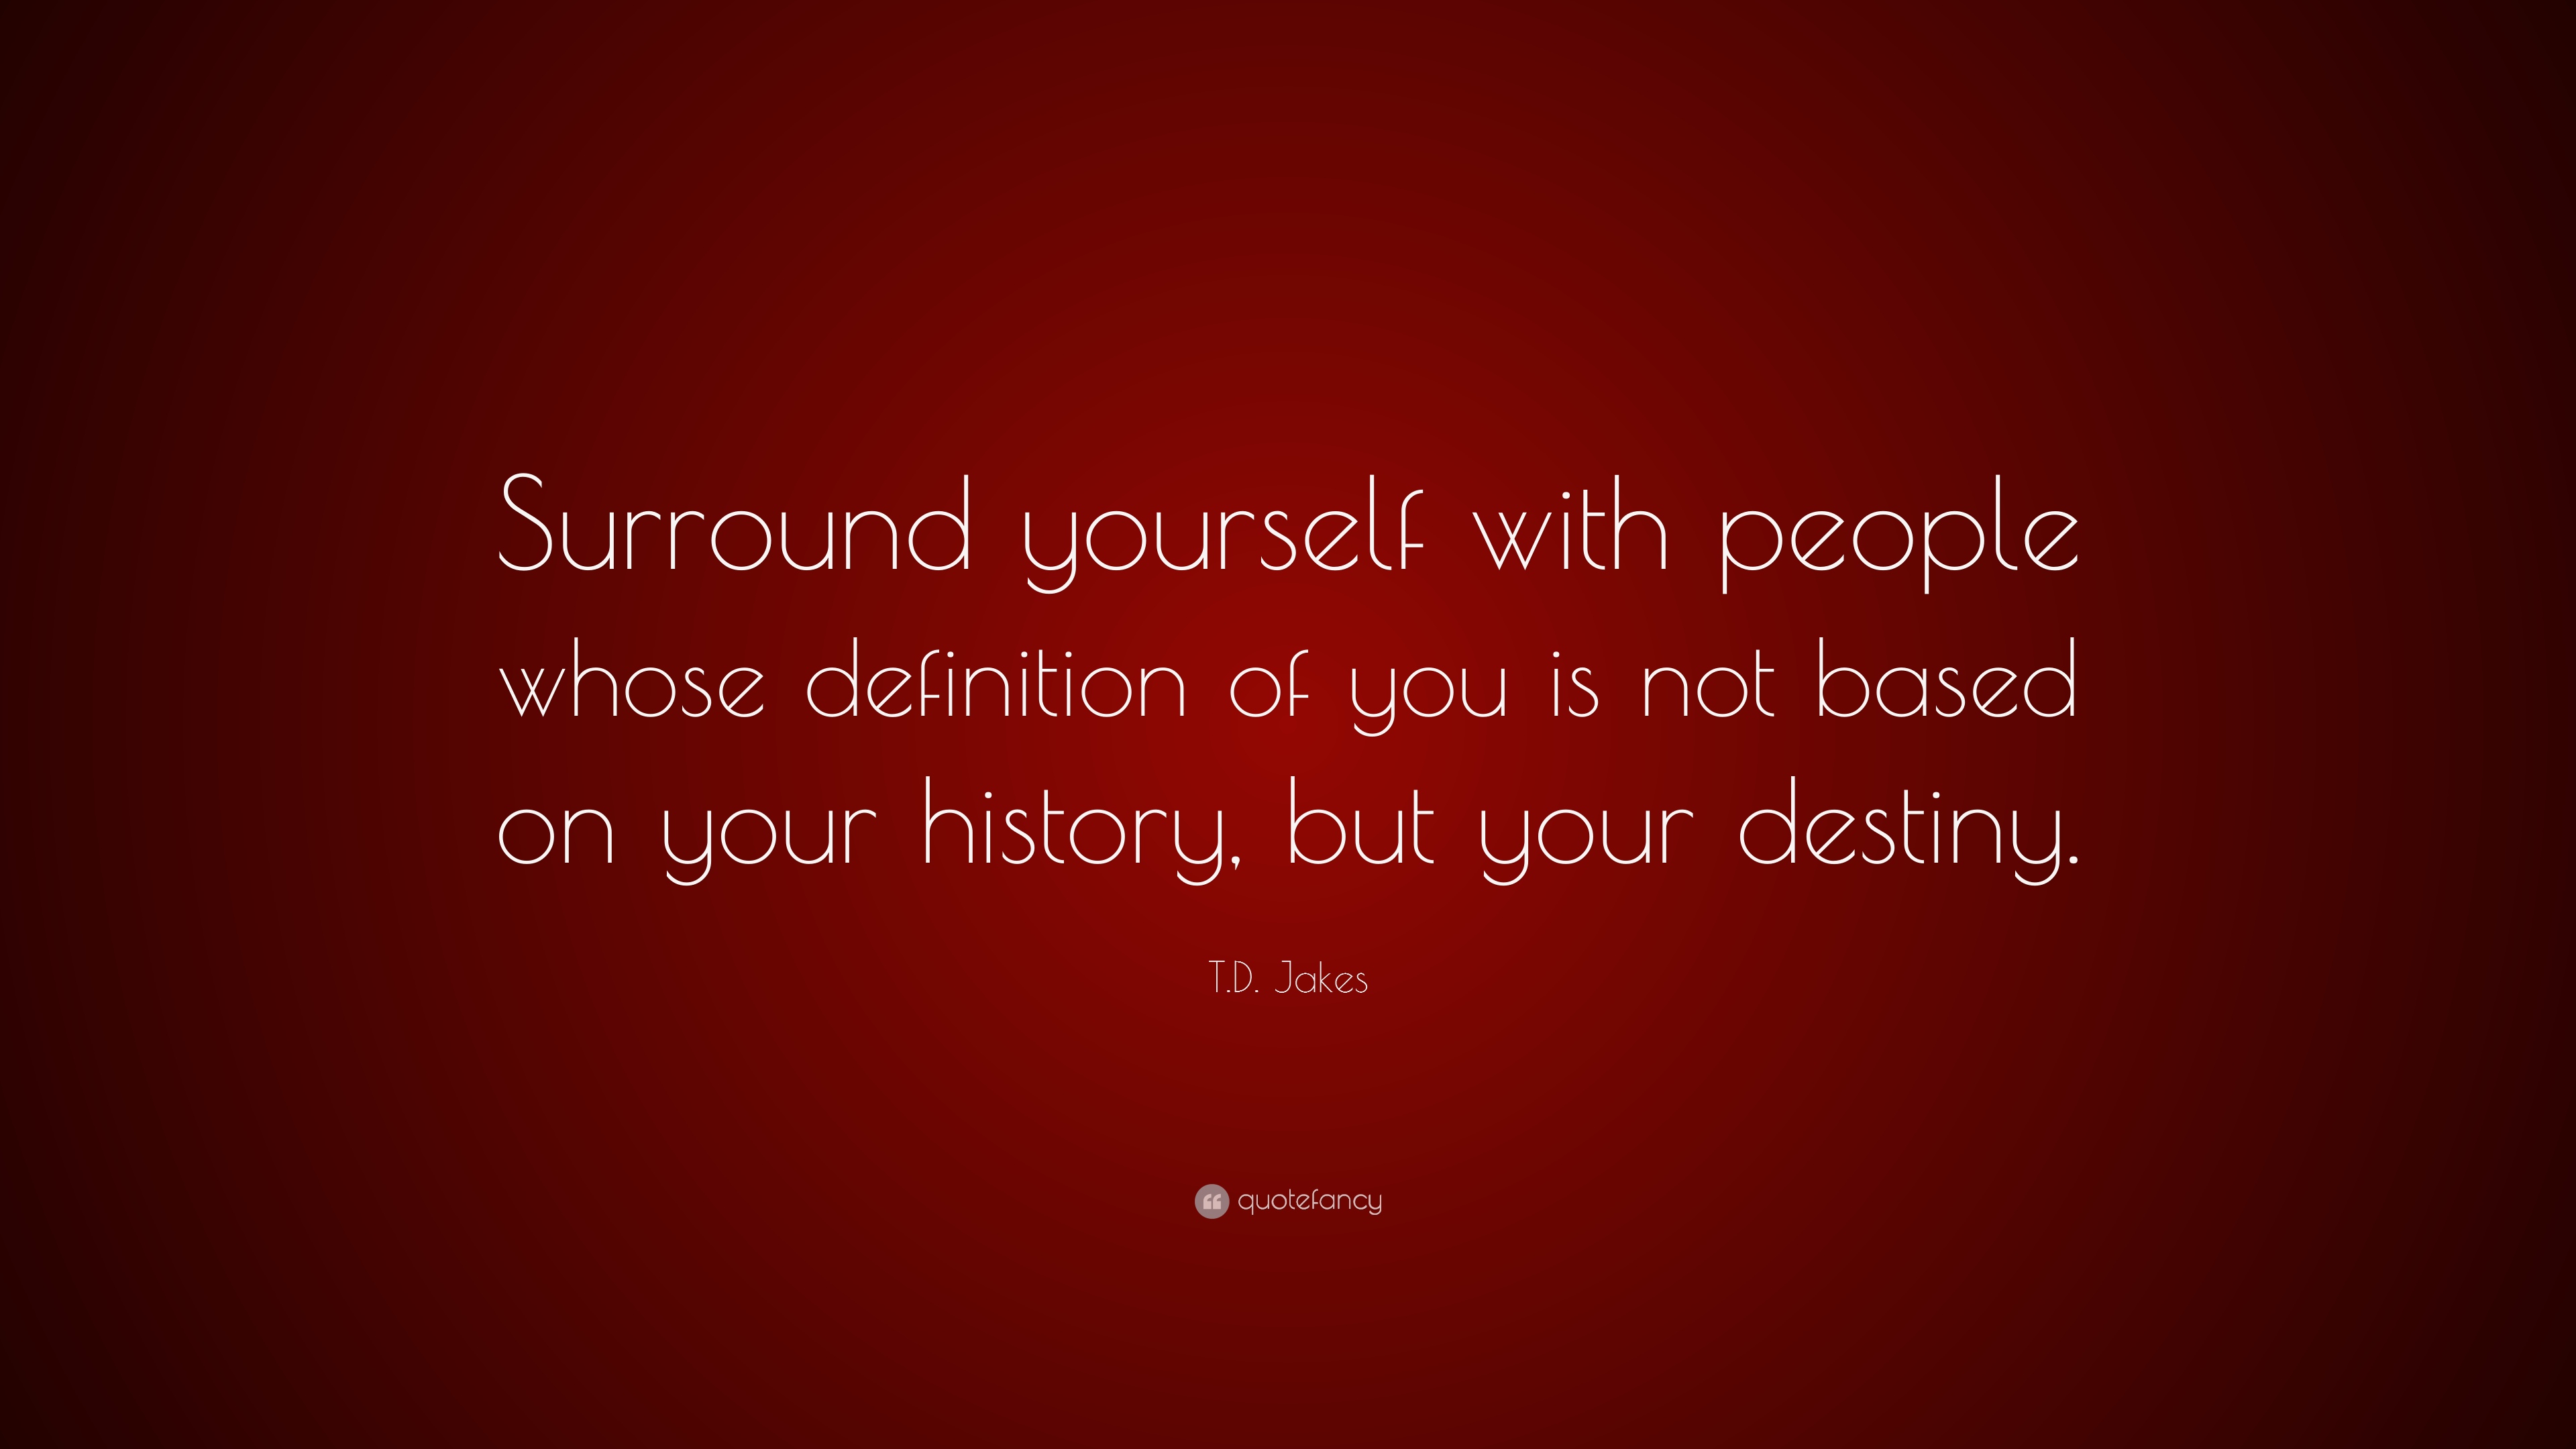 T.D. Jakes Quote: "Surround yourself with people whose definition of y...